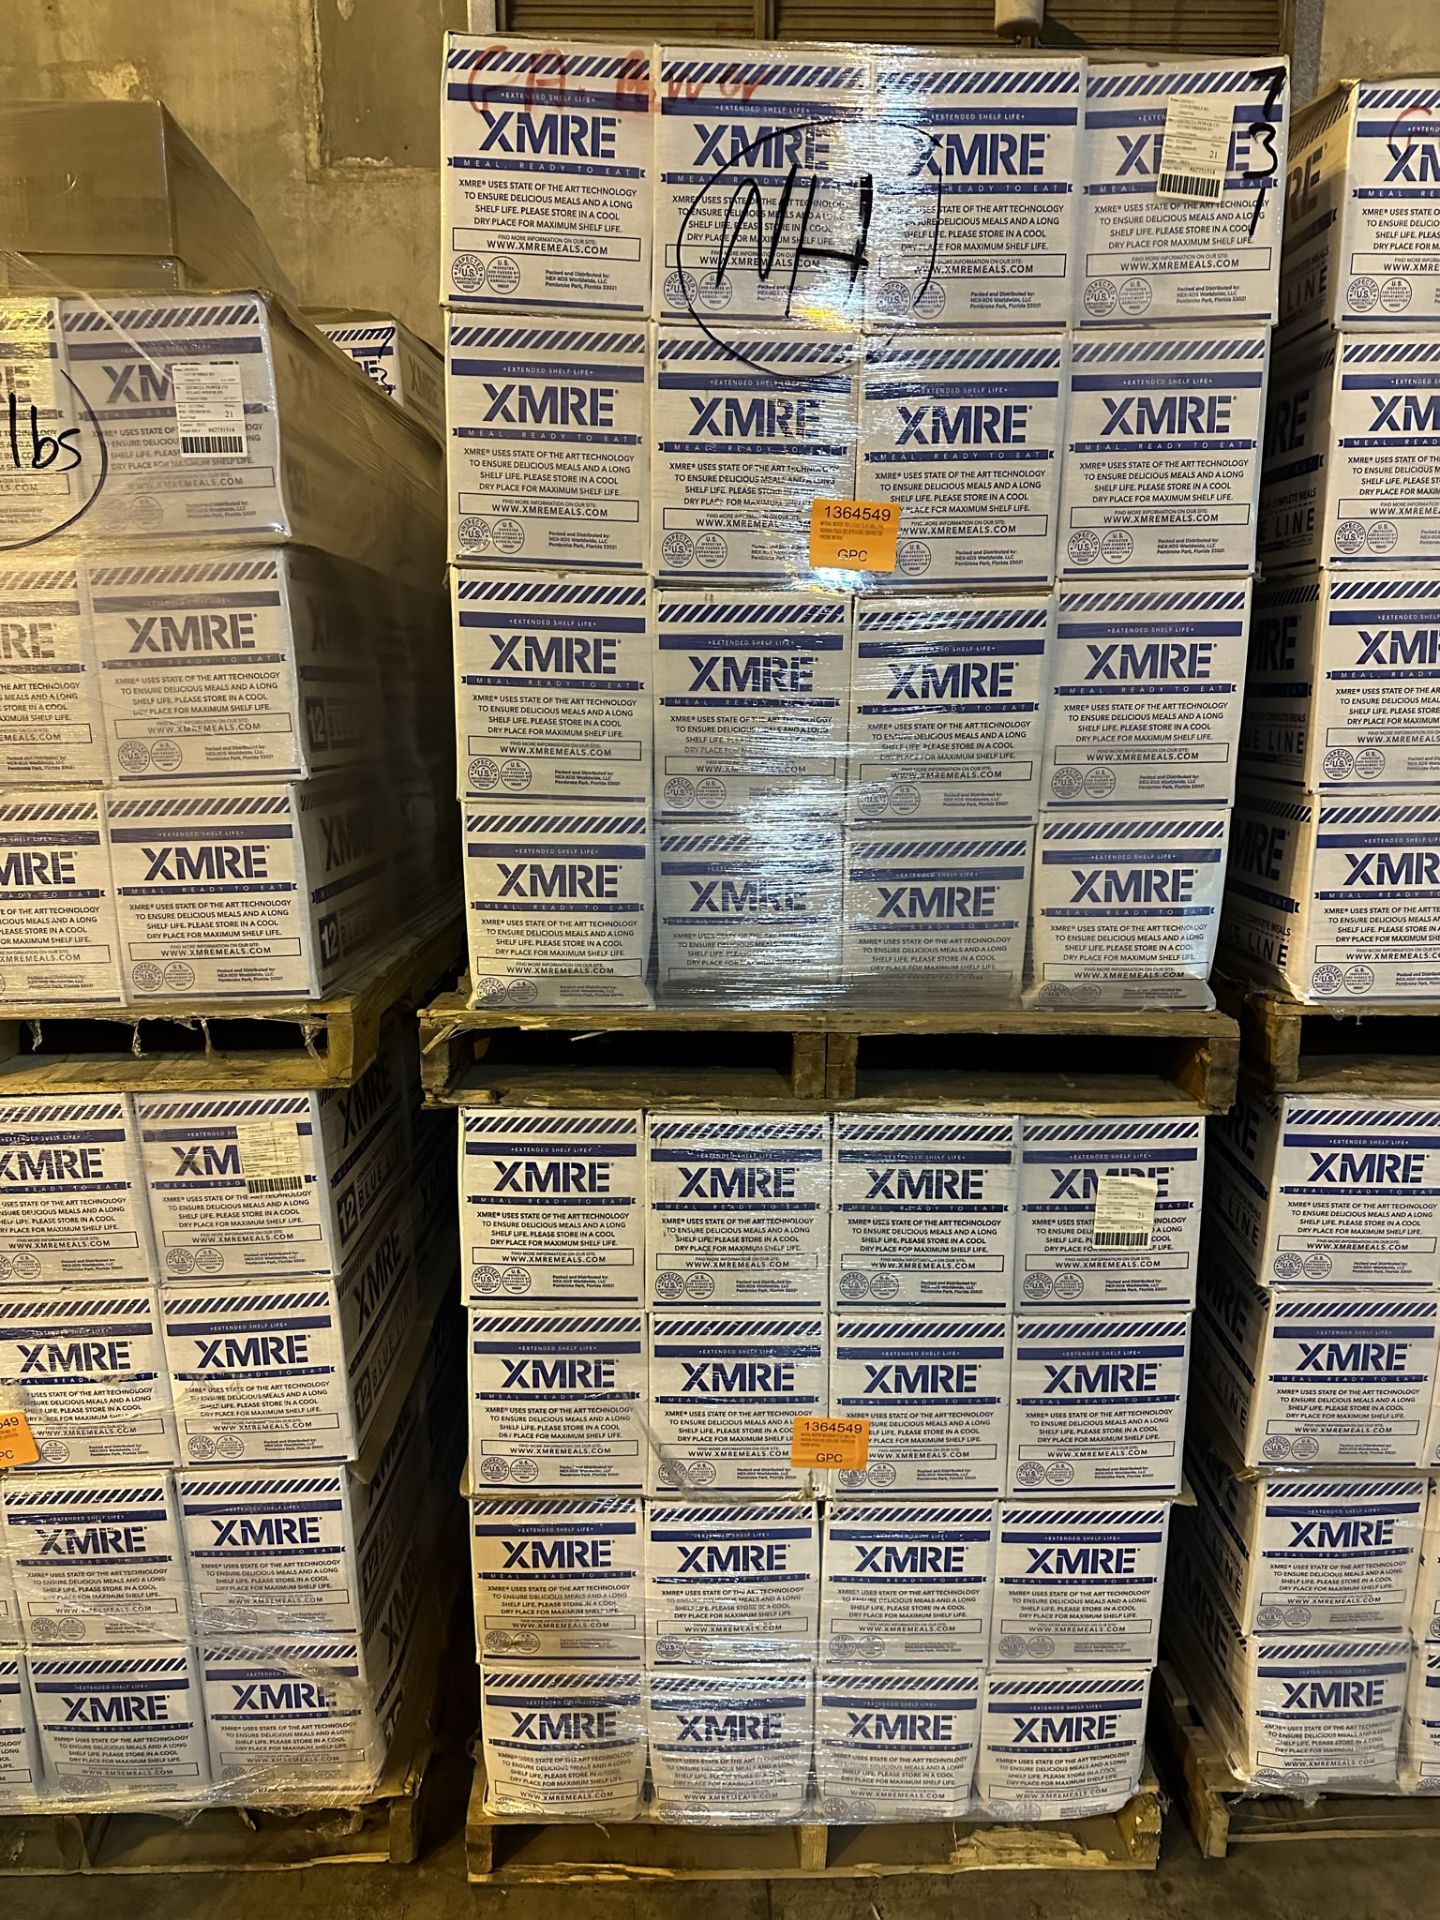 Lot of (48) Cases of XMRE Meals - Extended Shelf Life Meal, Ready to Eat - Image 16 of 16